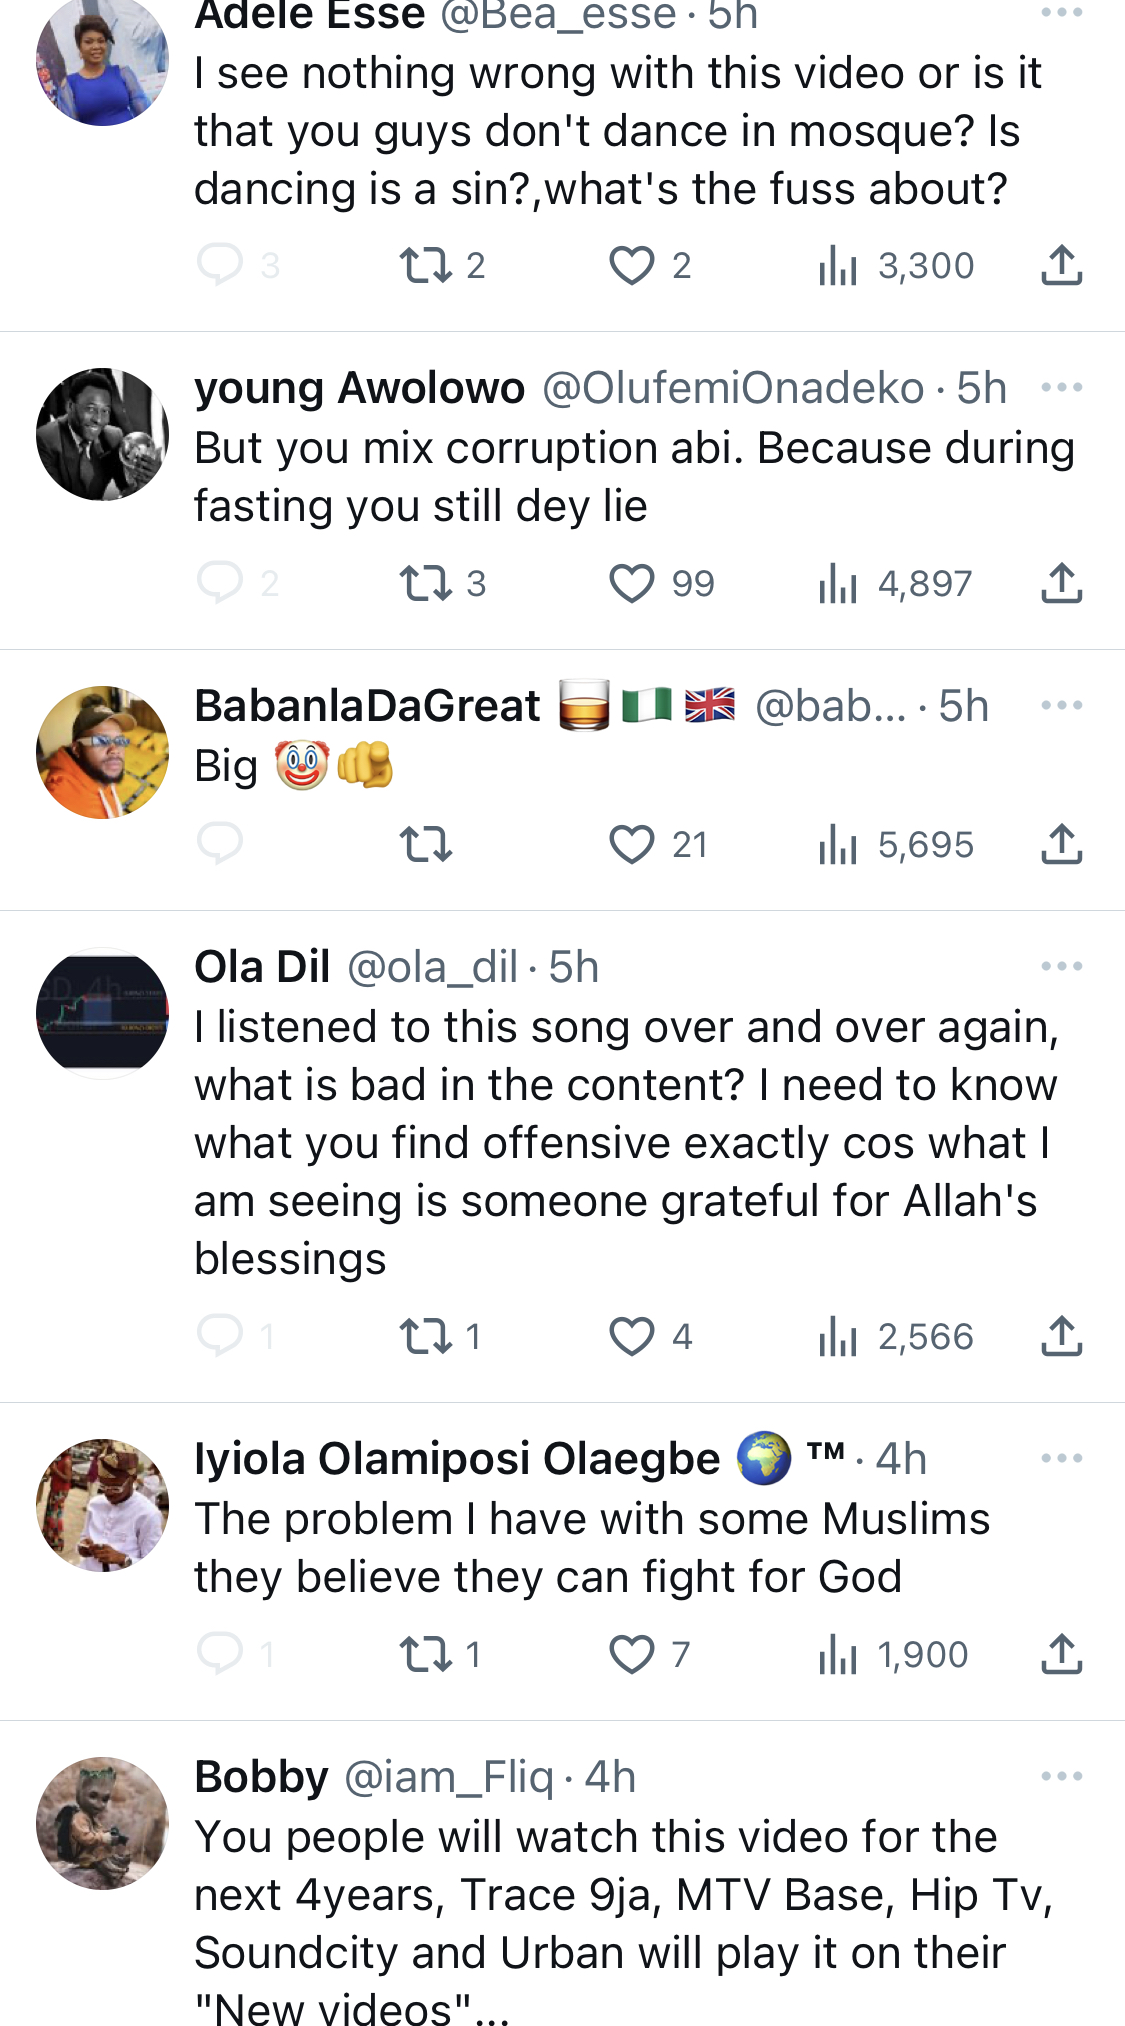 Every Muslim finds this offensive - Ex-Buhari aide Bashir tells Davido as he faces backlash for promoting video with Islamic prayer [photos]